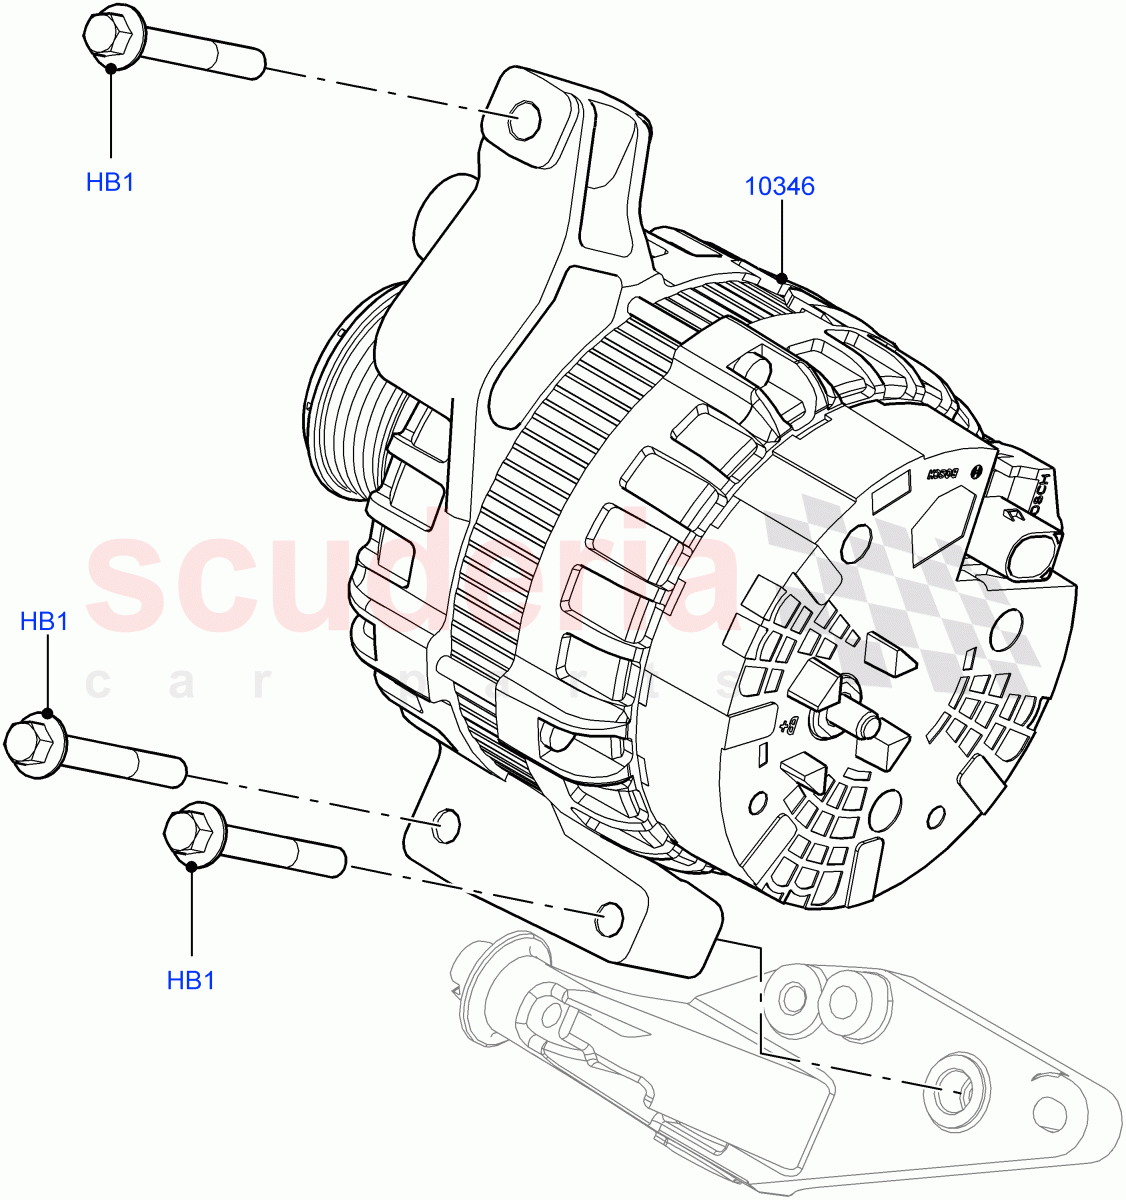 Alternator And Mountings(2.0L 16V TIVCT T/C 240PS Petrol,Itatiaia (Brazil))((V)FROMGT000001) of Land Rover Land Rover Range Rover Evoque (2012-2018) [2.0 Turbo Diesel]